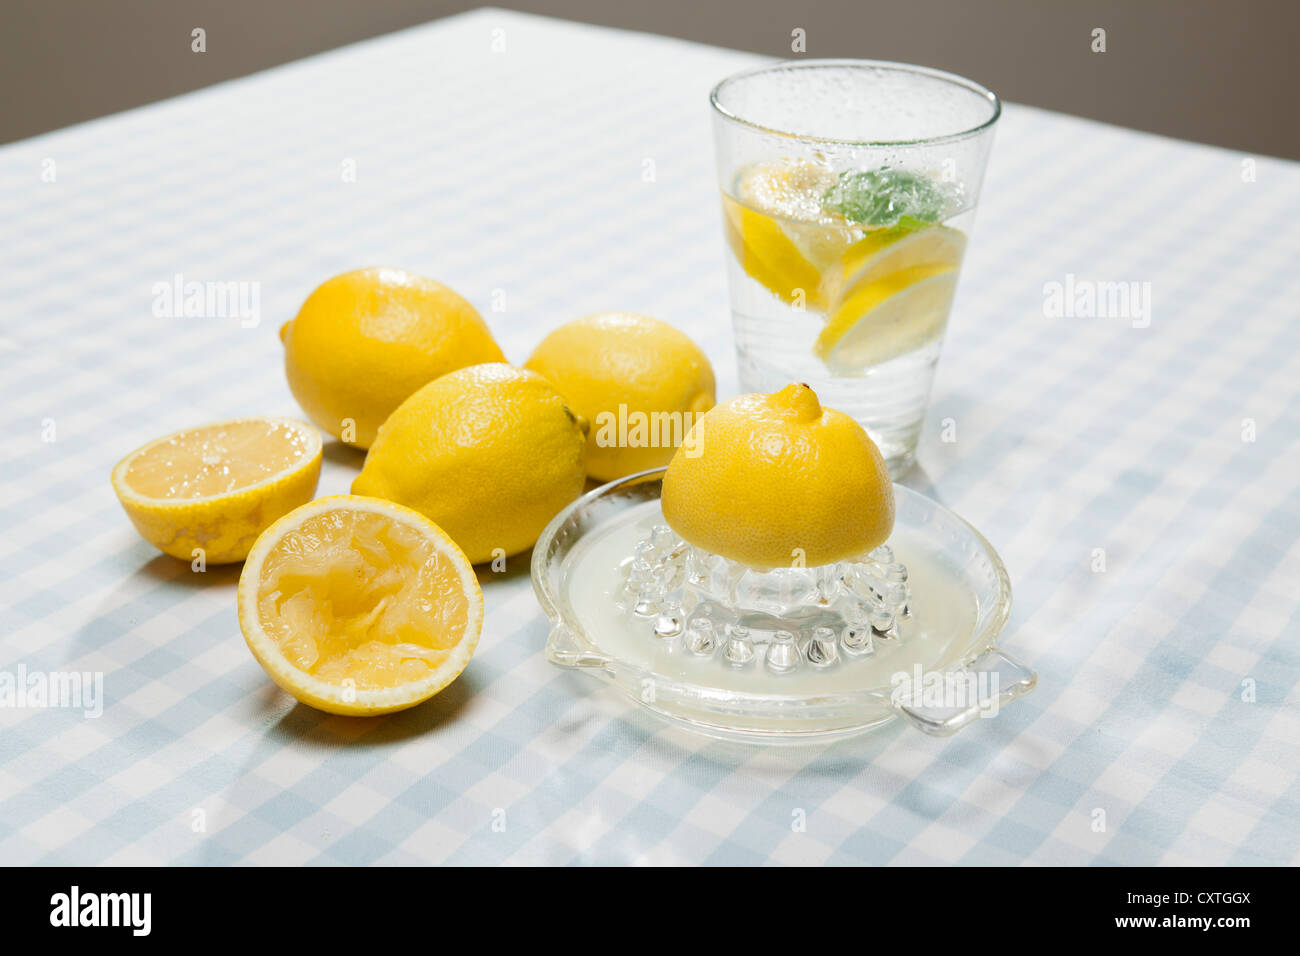 Lemons, juicer and glass of water Stock Photo